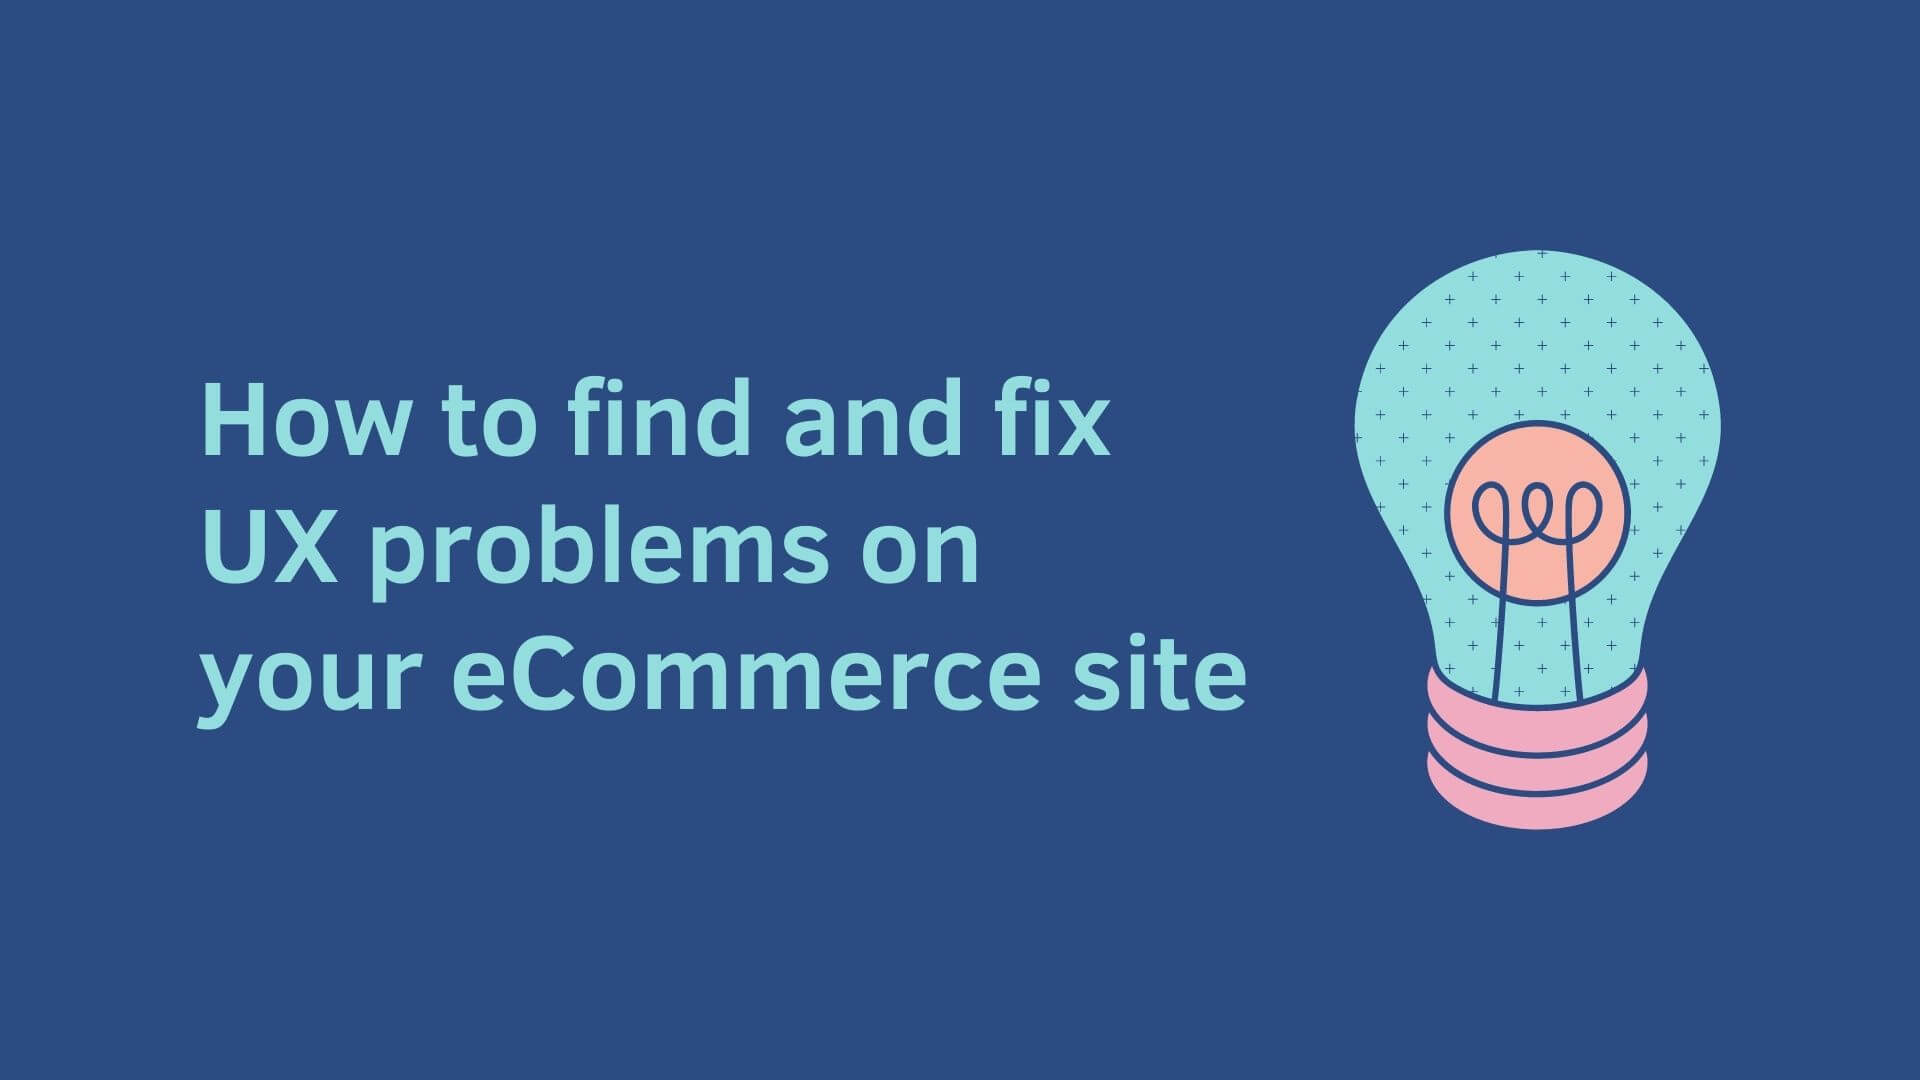 How to find and fix UX problems on your ecommerce site